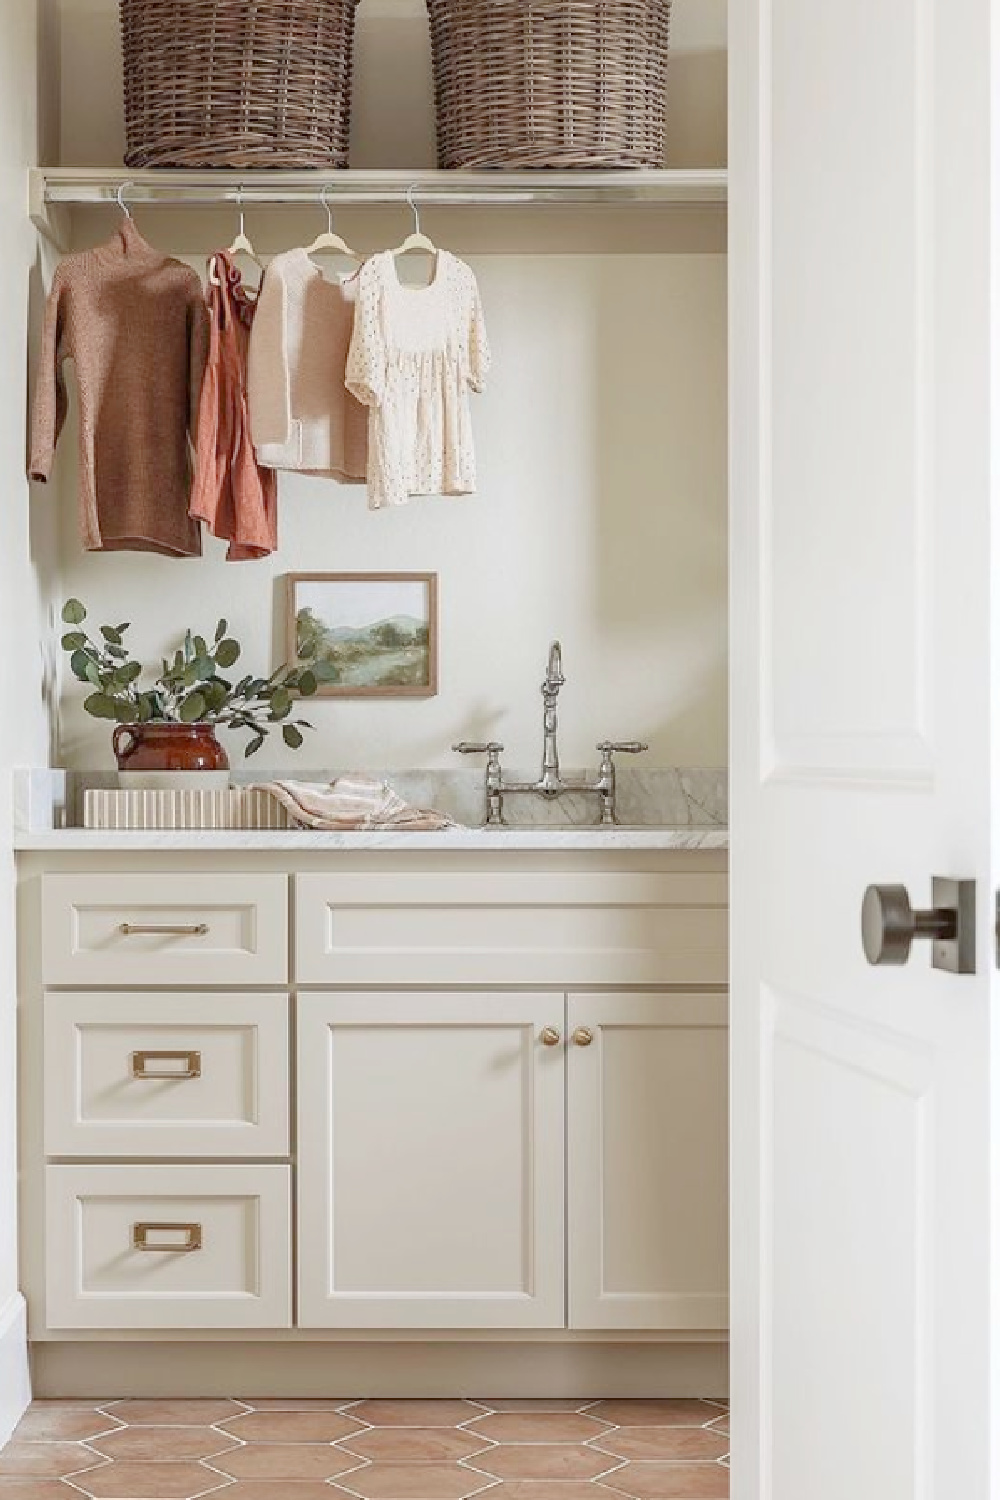 Sophisticated laundry room with putty cabinets, terracotta hex tile, and bridge faucet - Kelsey Leigh Design Co. #laundryrooms #interiordesign